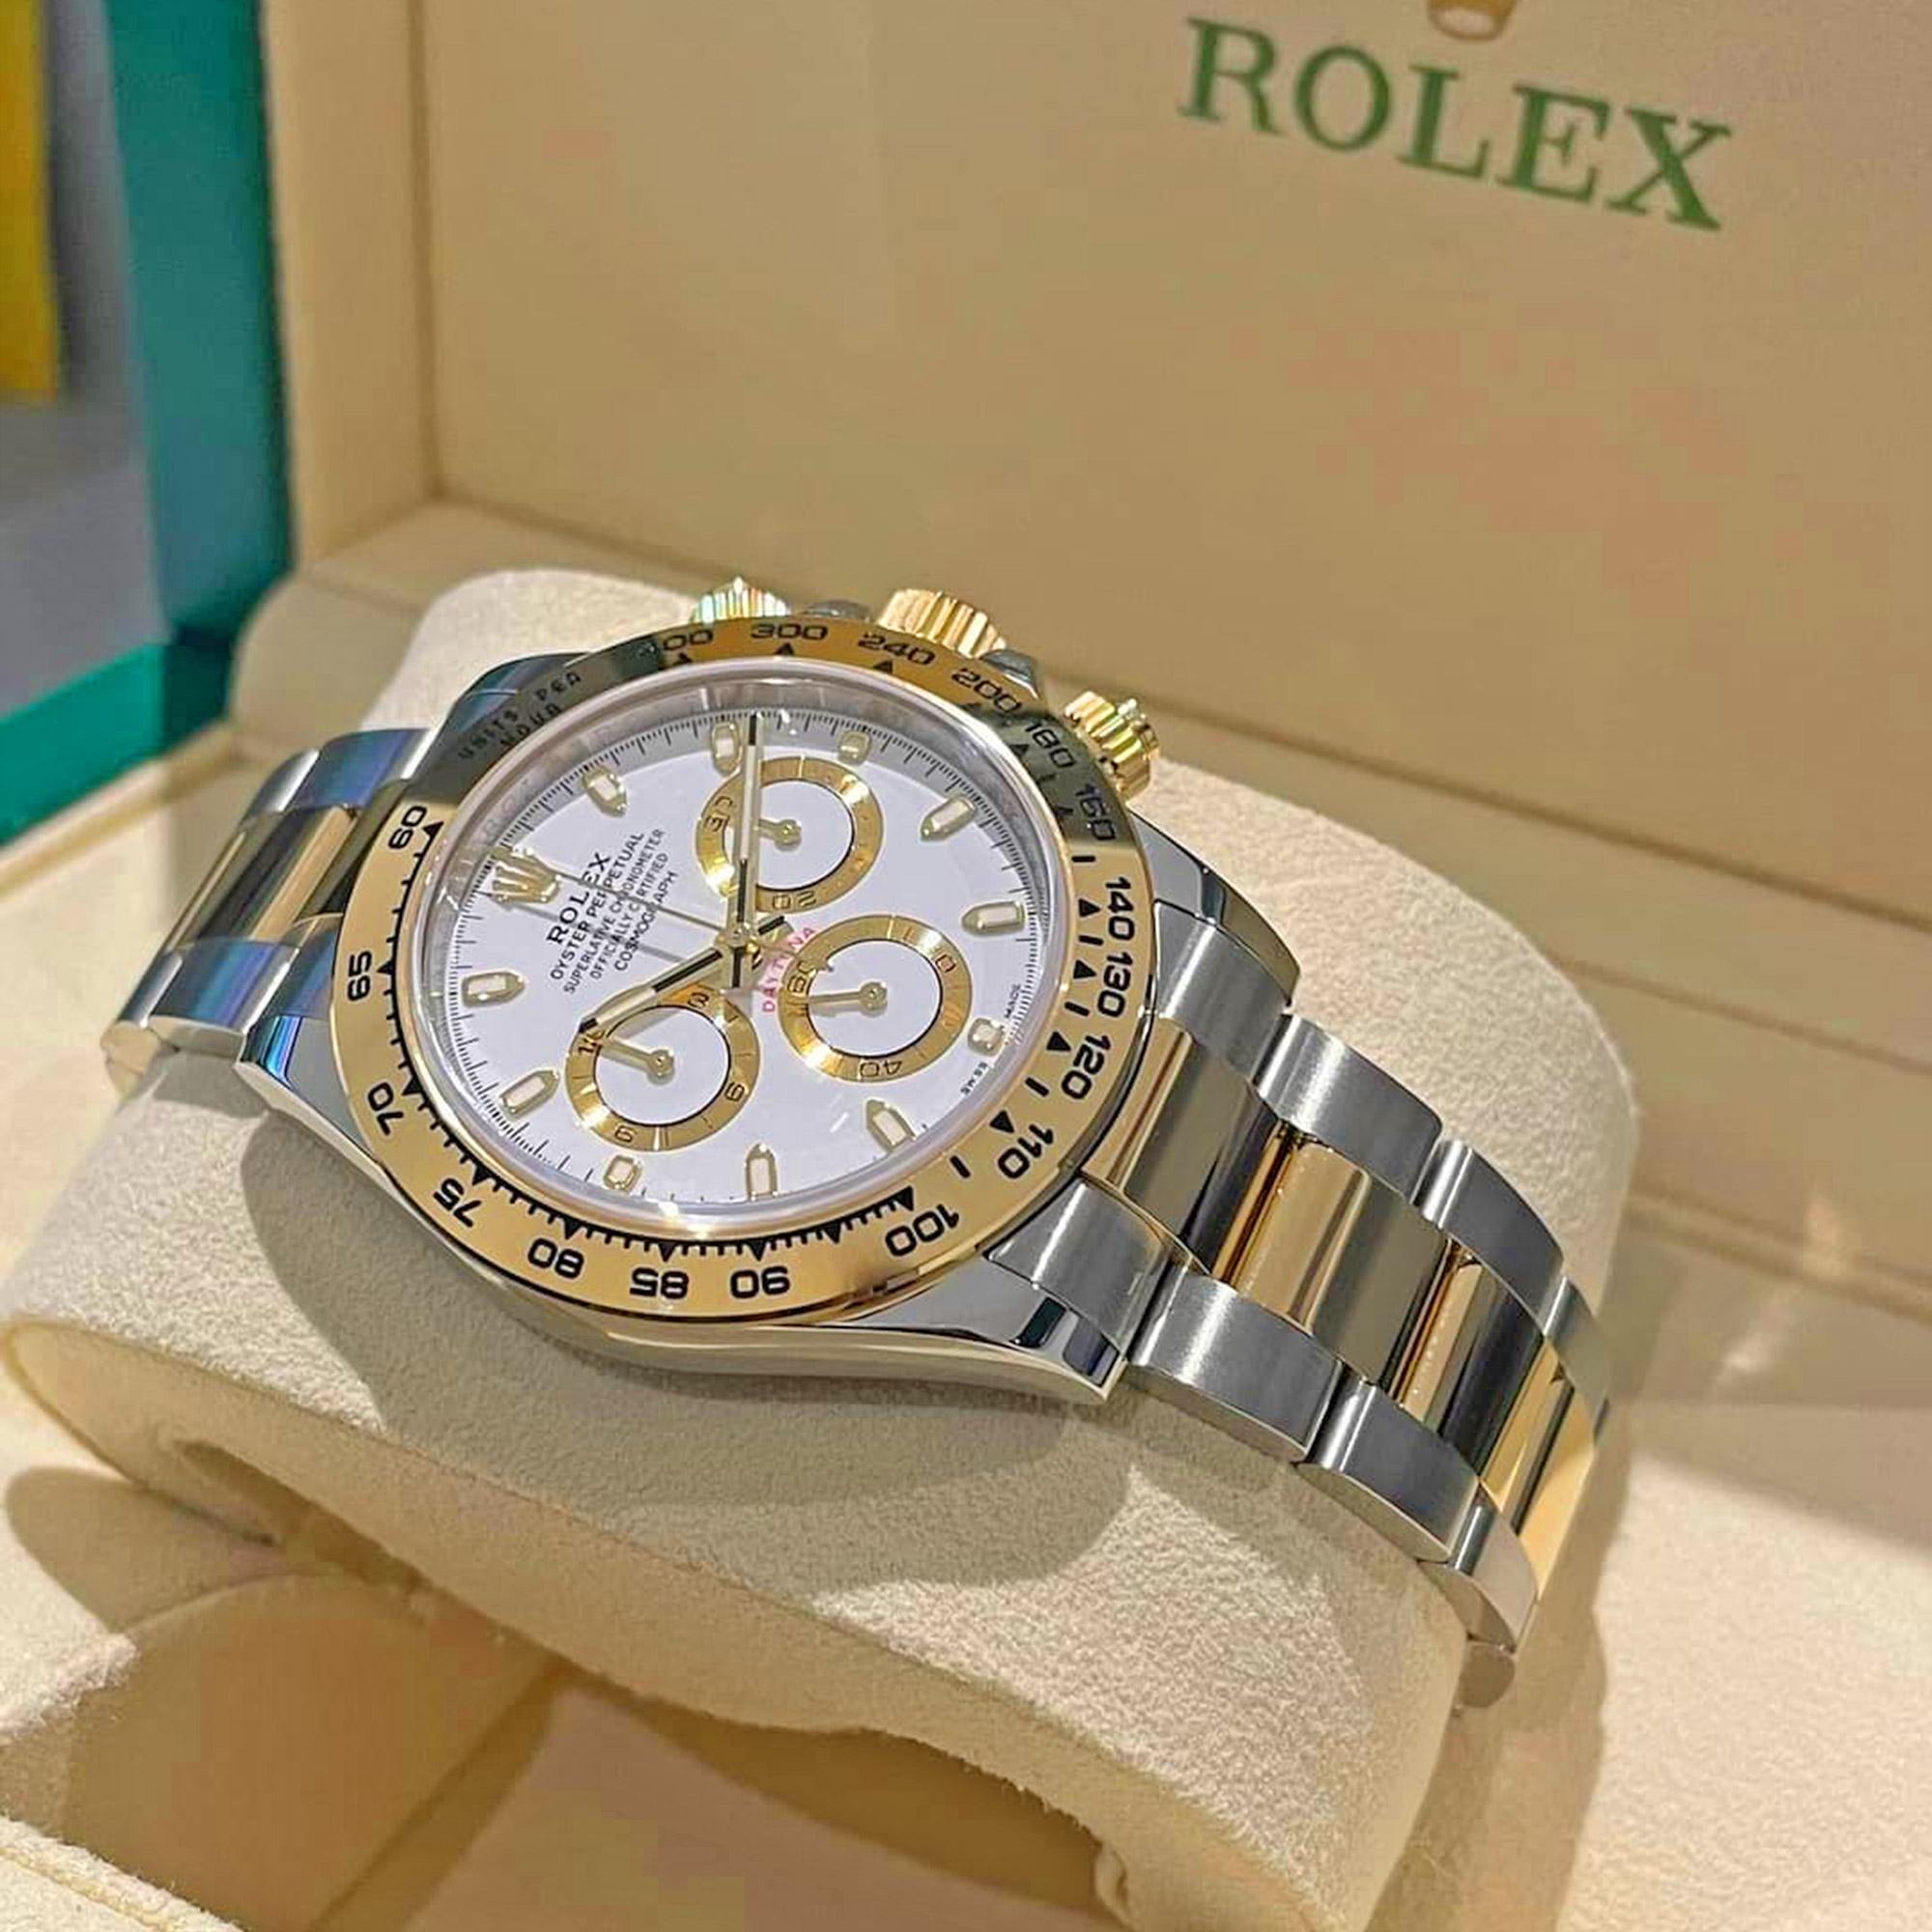 Rolex Cosmograph Daytona, 18k Yellow Gold and Stainless Steel 40mm watch, Reference 116503-0001. This model has White dial and white Champagne rimmed white sub-dials. Highly legible Chromalight display with long-lasting blue luminescence. Applied